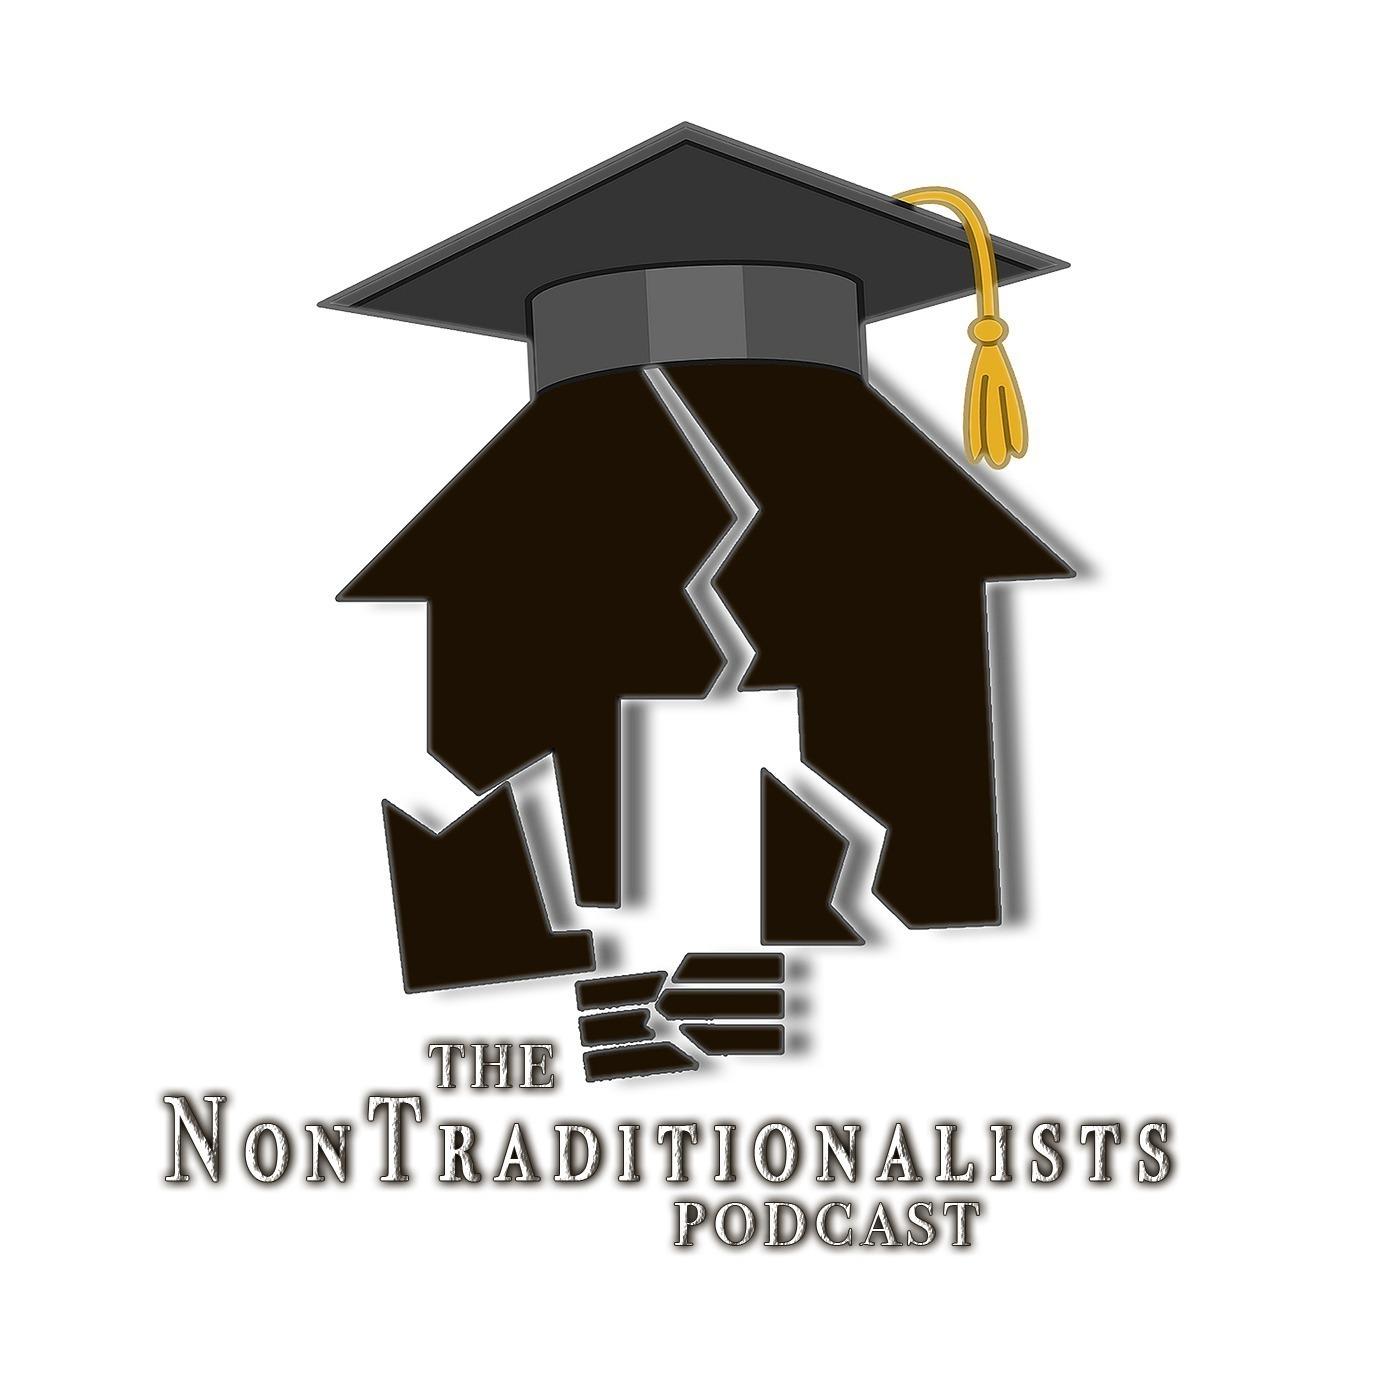 The Nontraditionalists Podcast